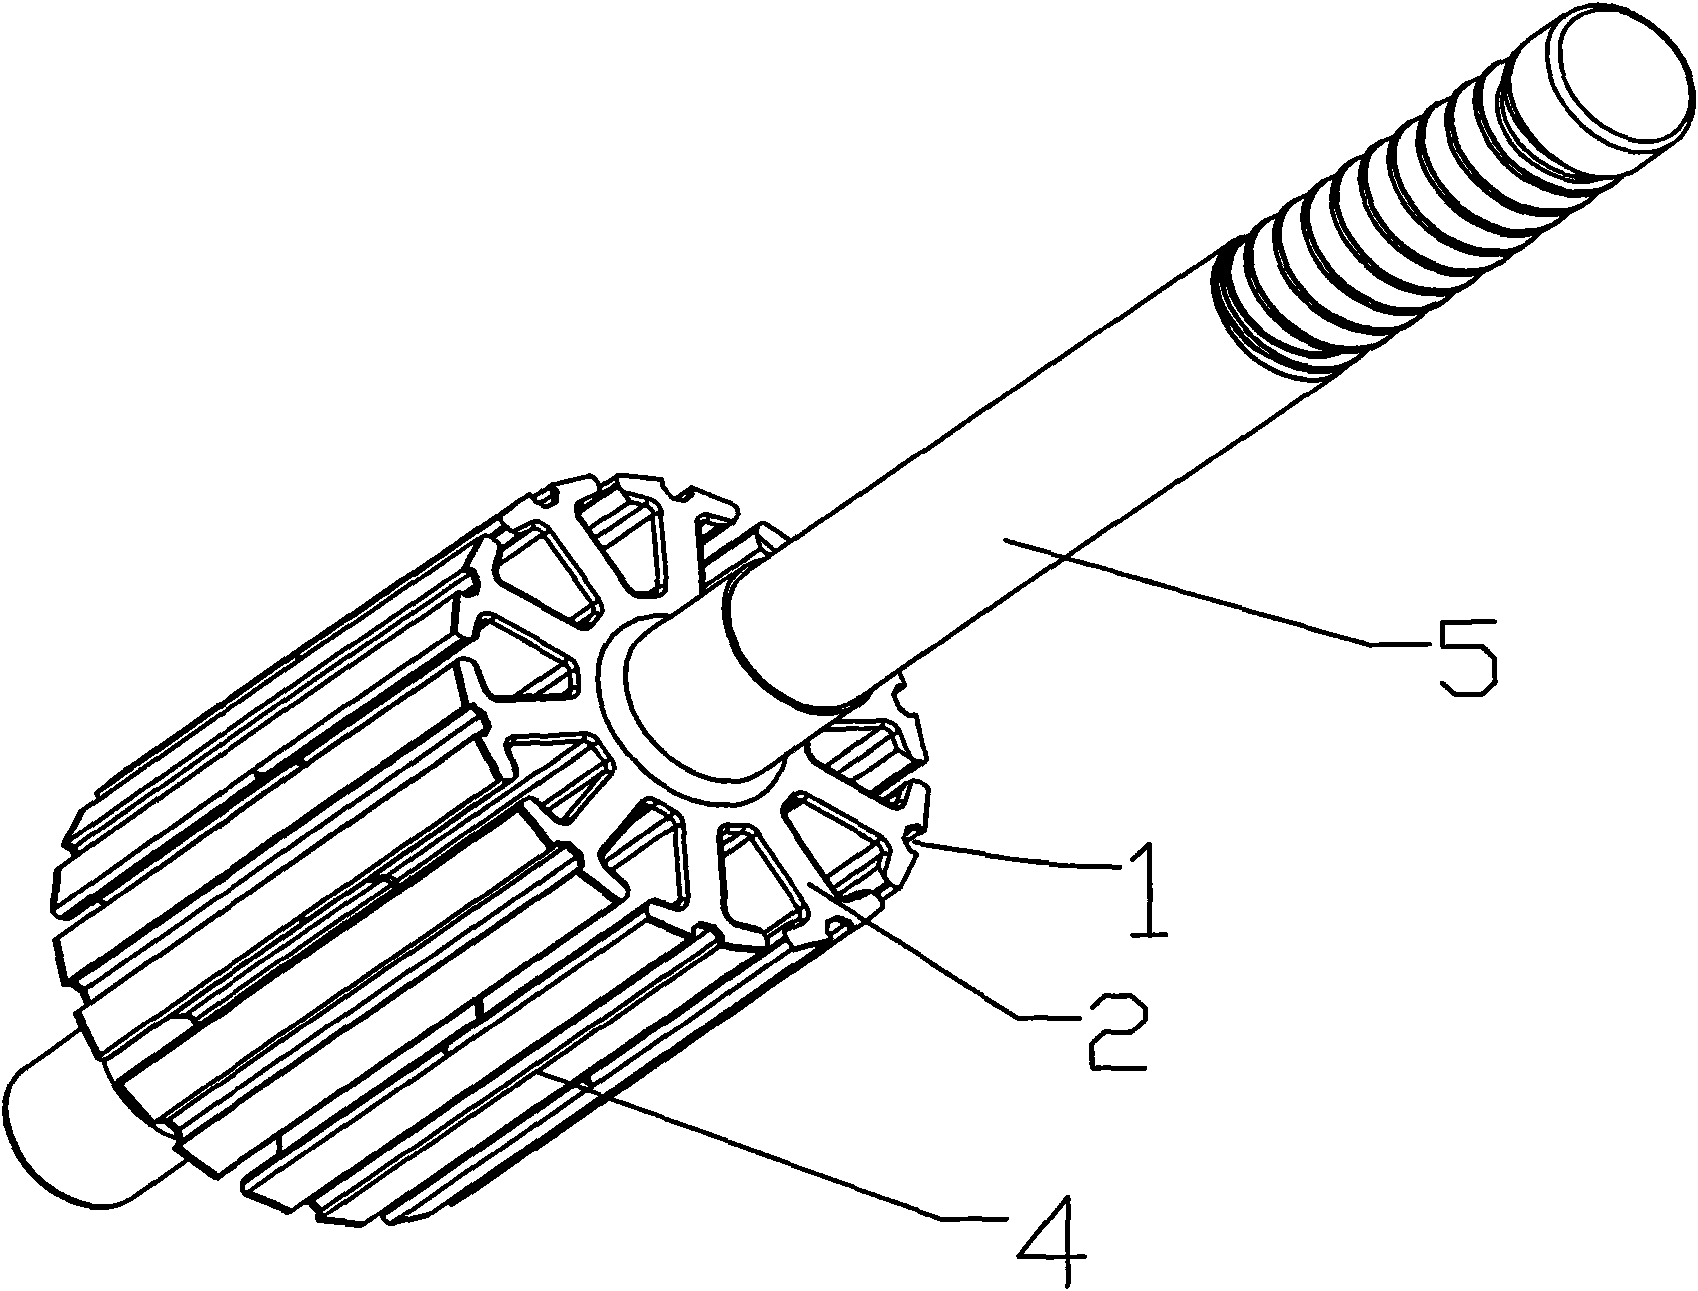 Armature core for rotating motor